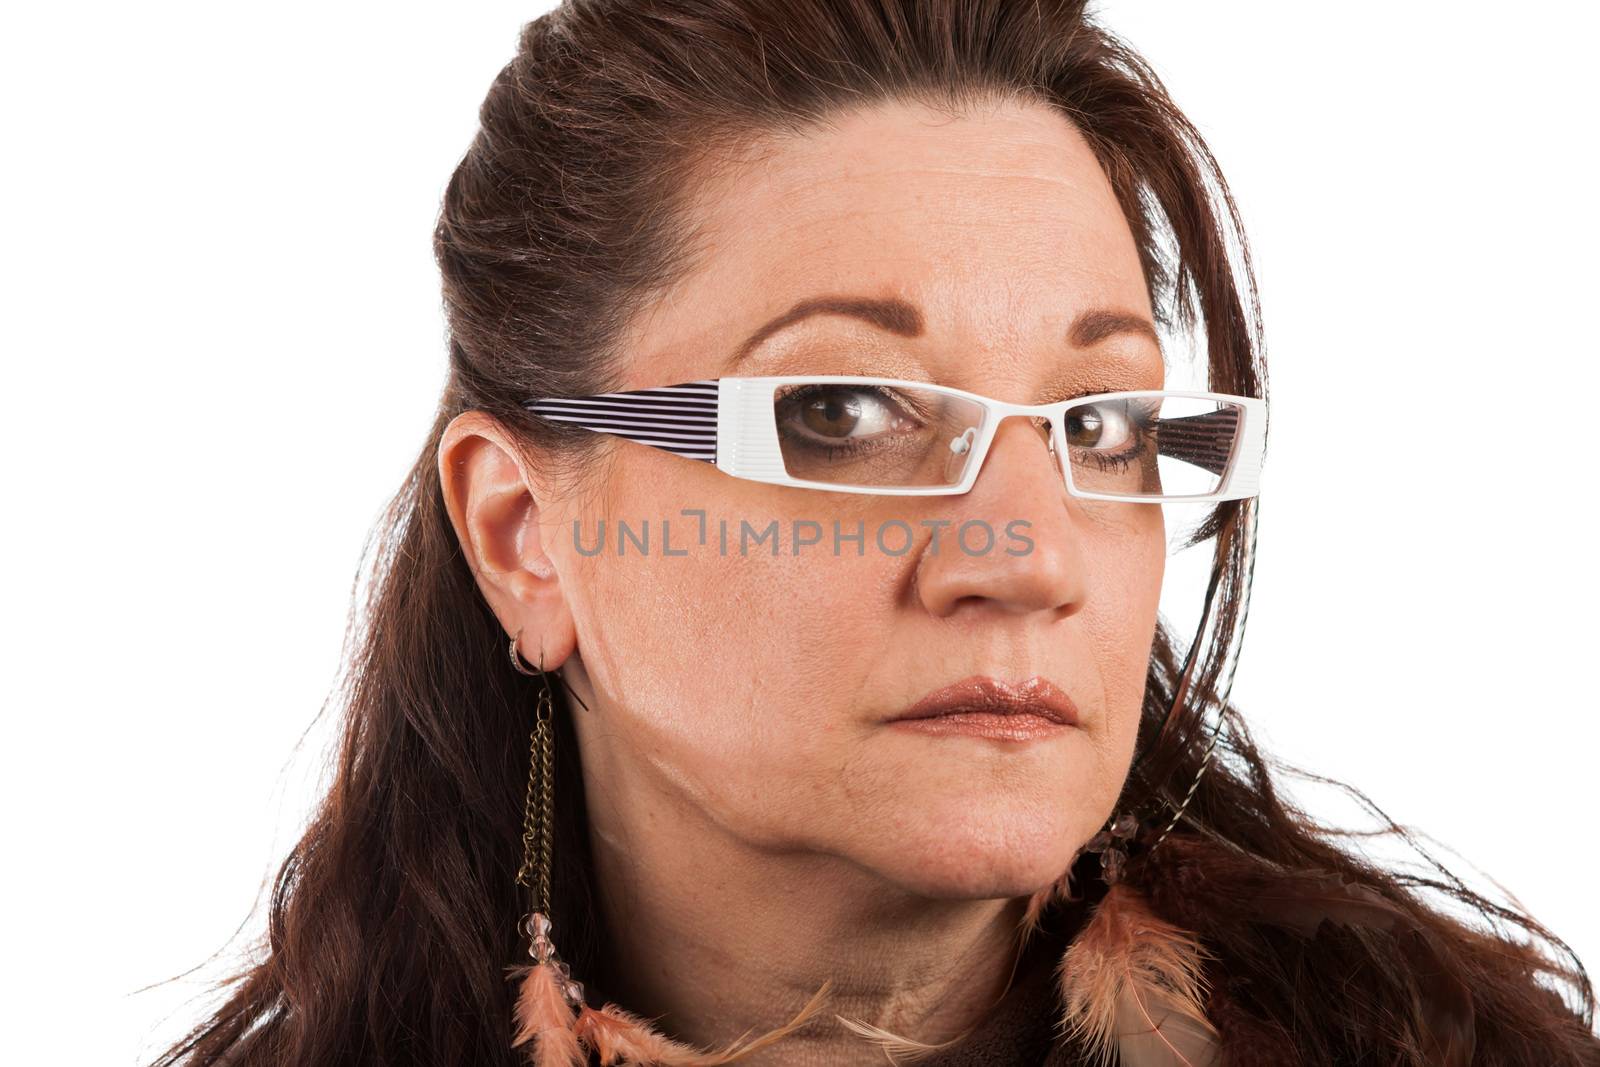 Brunette middle aged woman wearing white framed glasses with a serious expression.  Shallow depth of field.